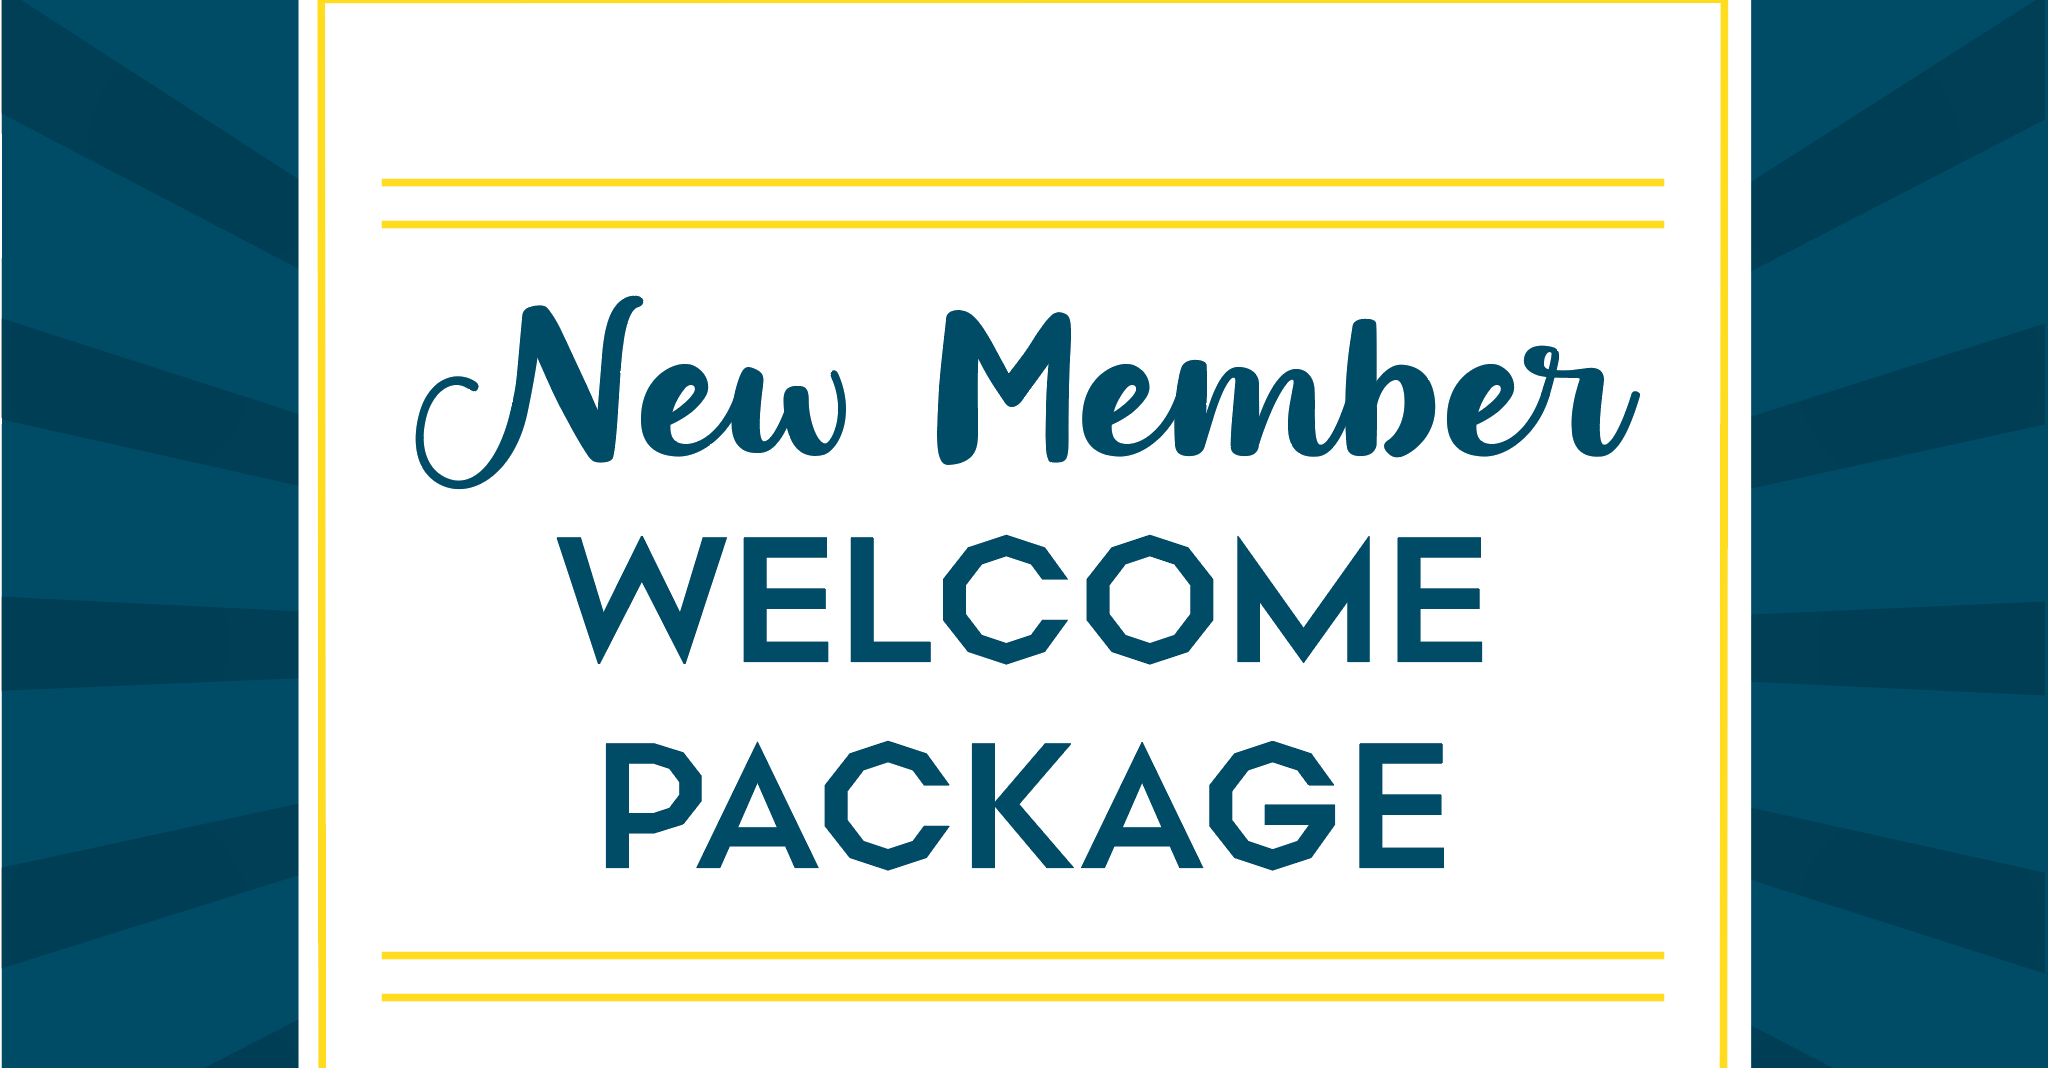 New Member Welcome Package Promo Burst